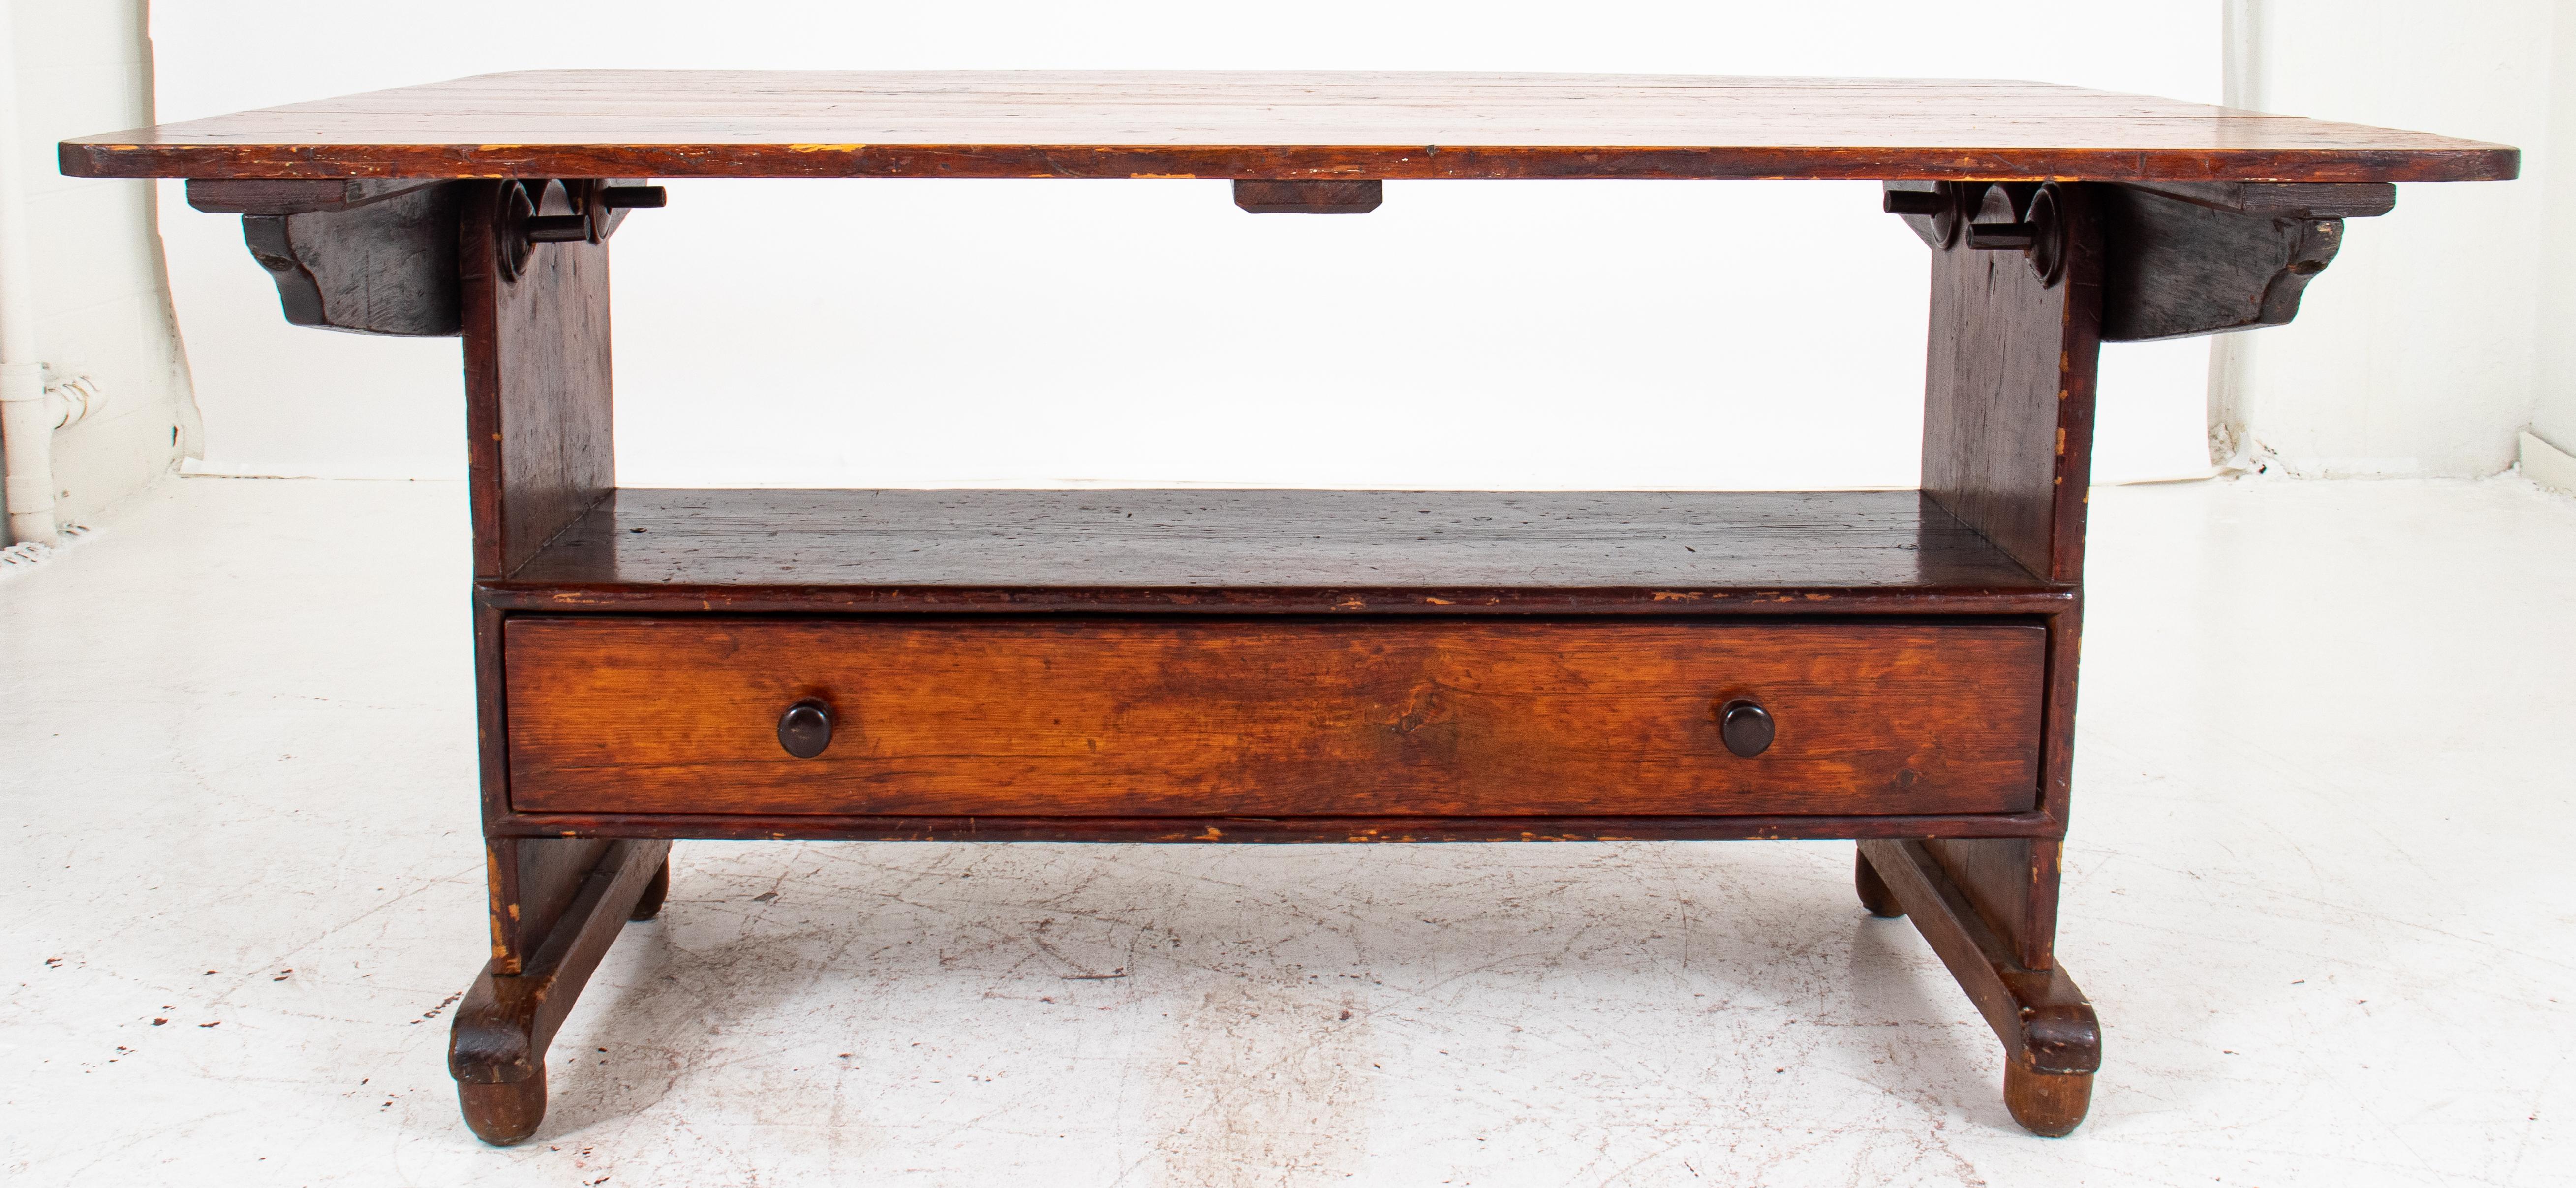 Provincial French Pine Tavern Table-Bench, 19th C. 3